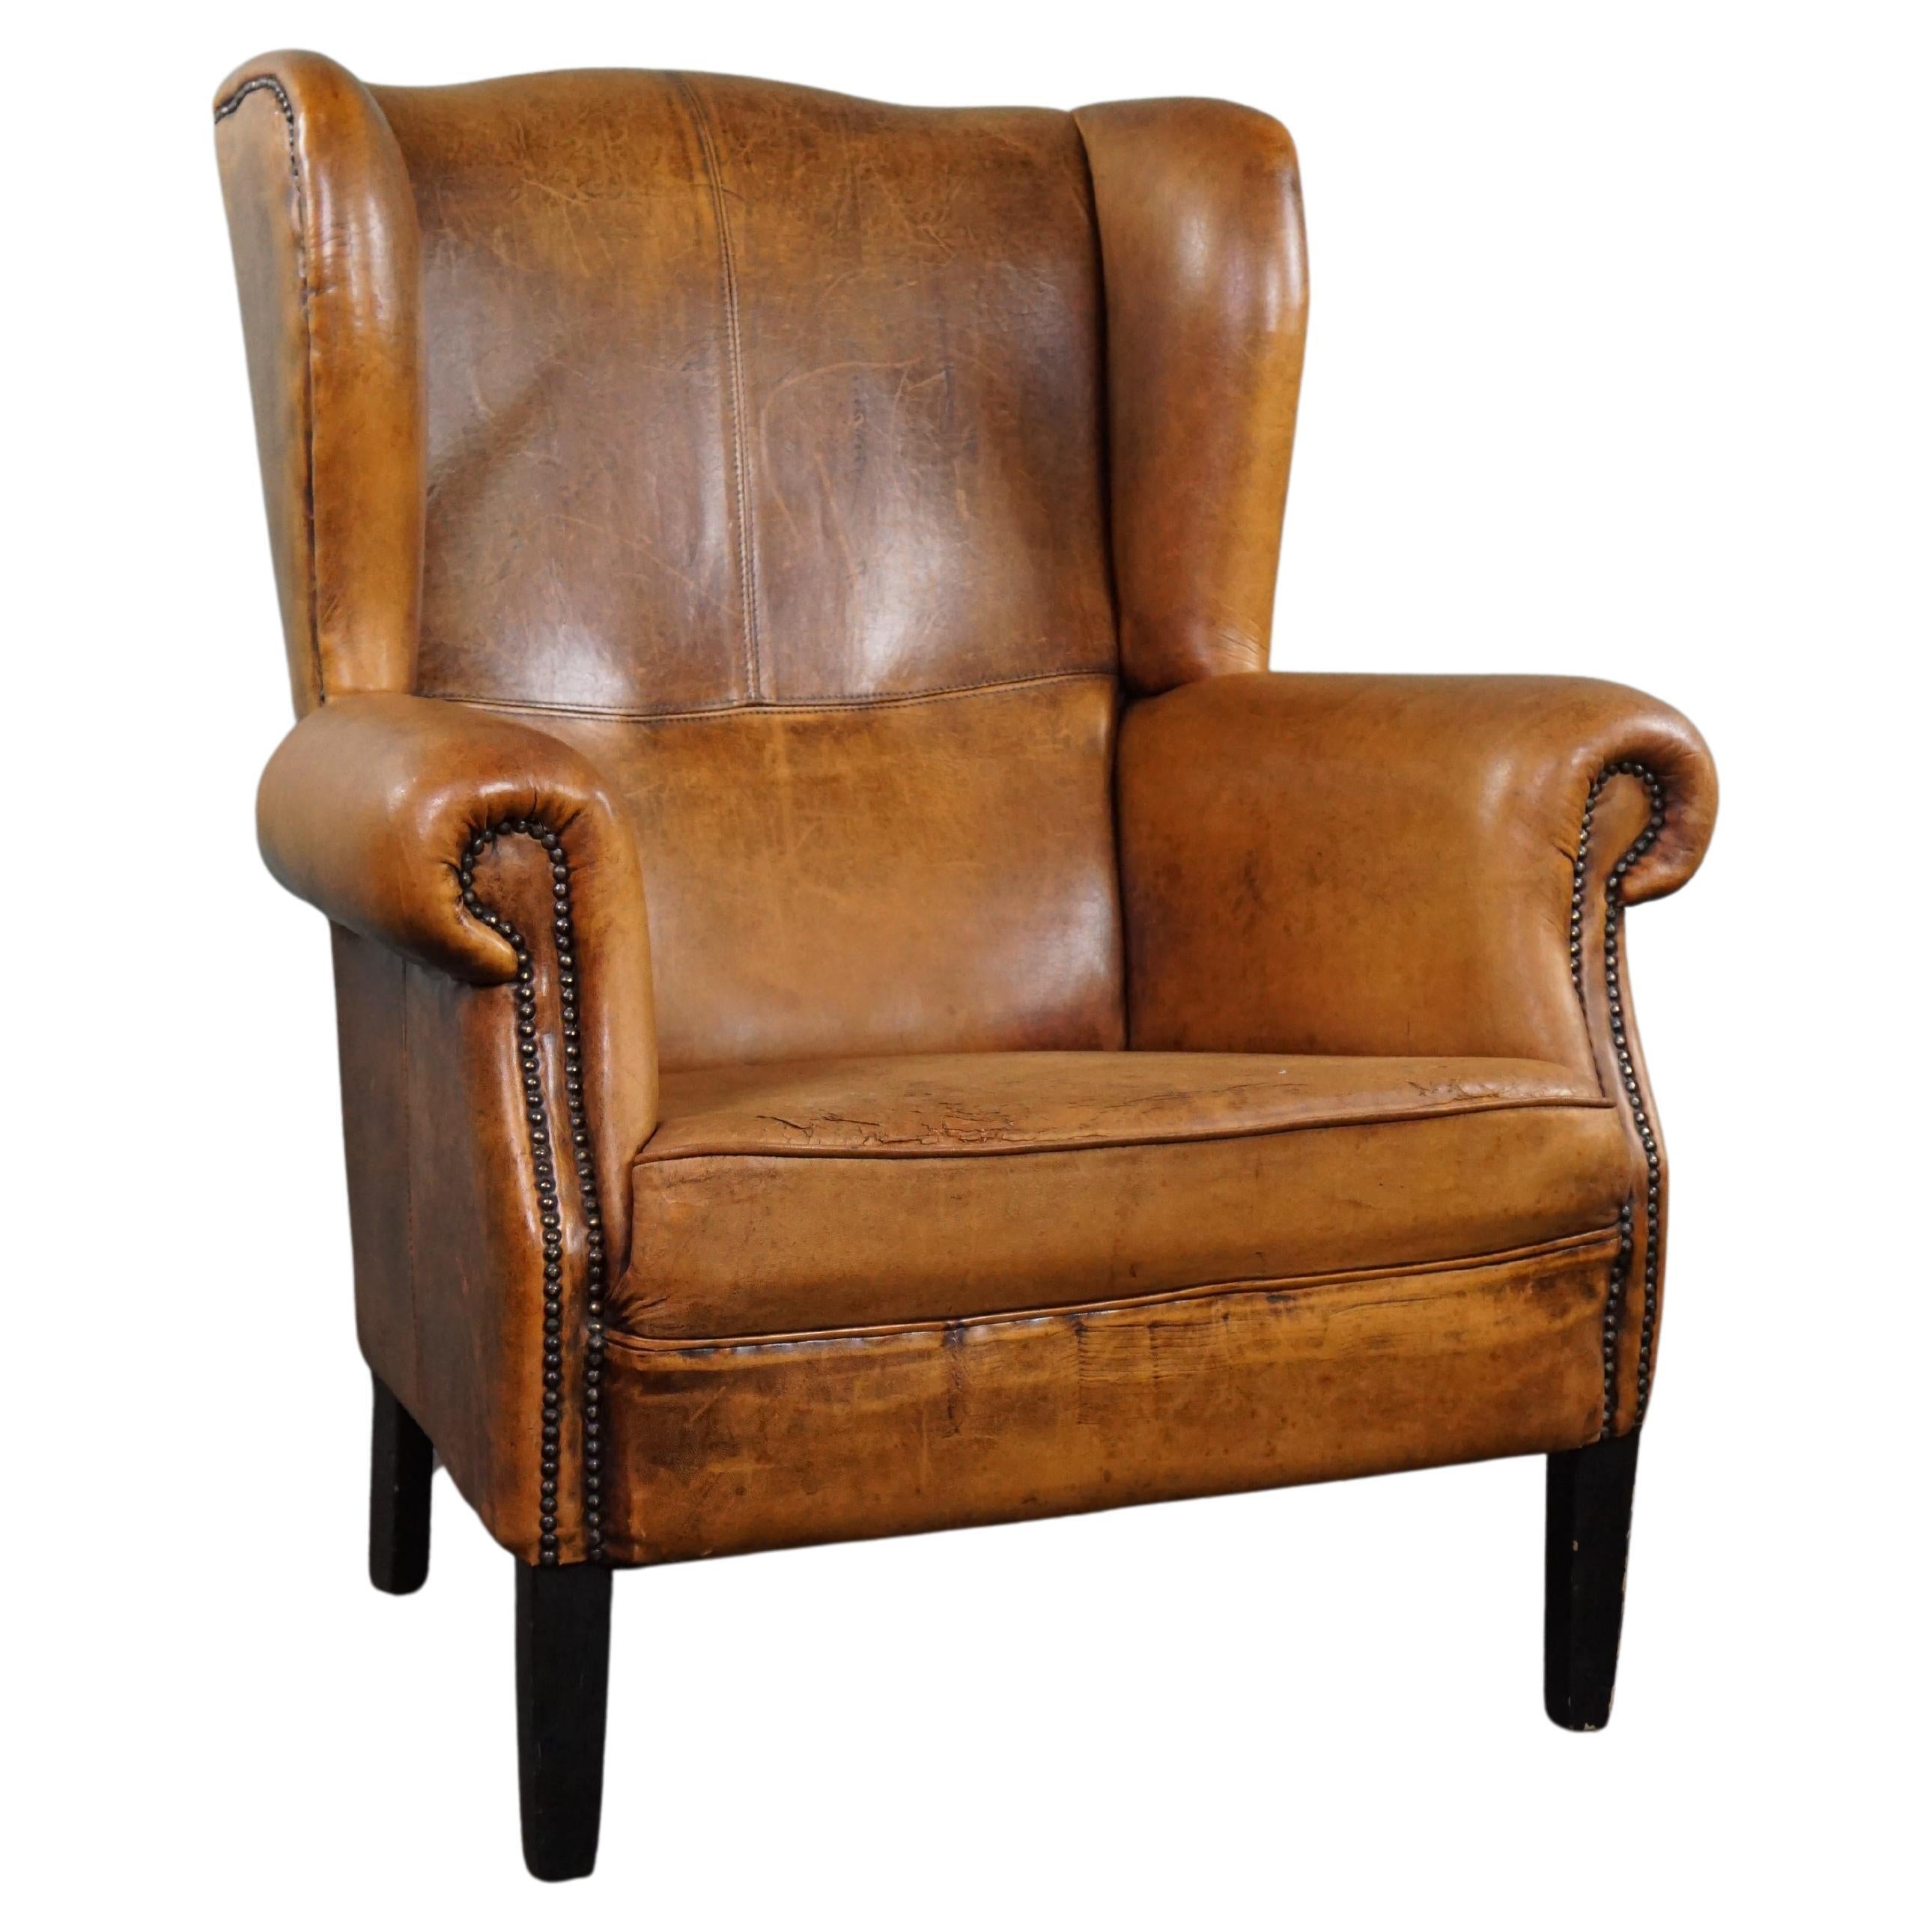 Generous and characterful sheep leather wingback chair